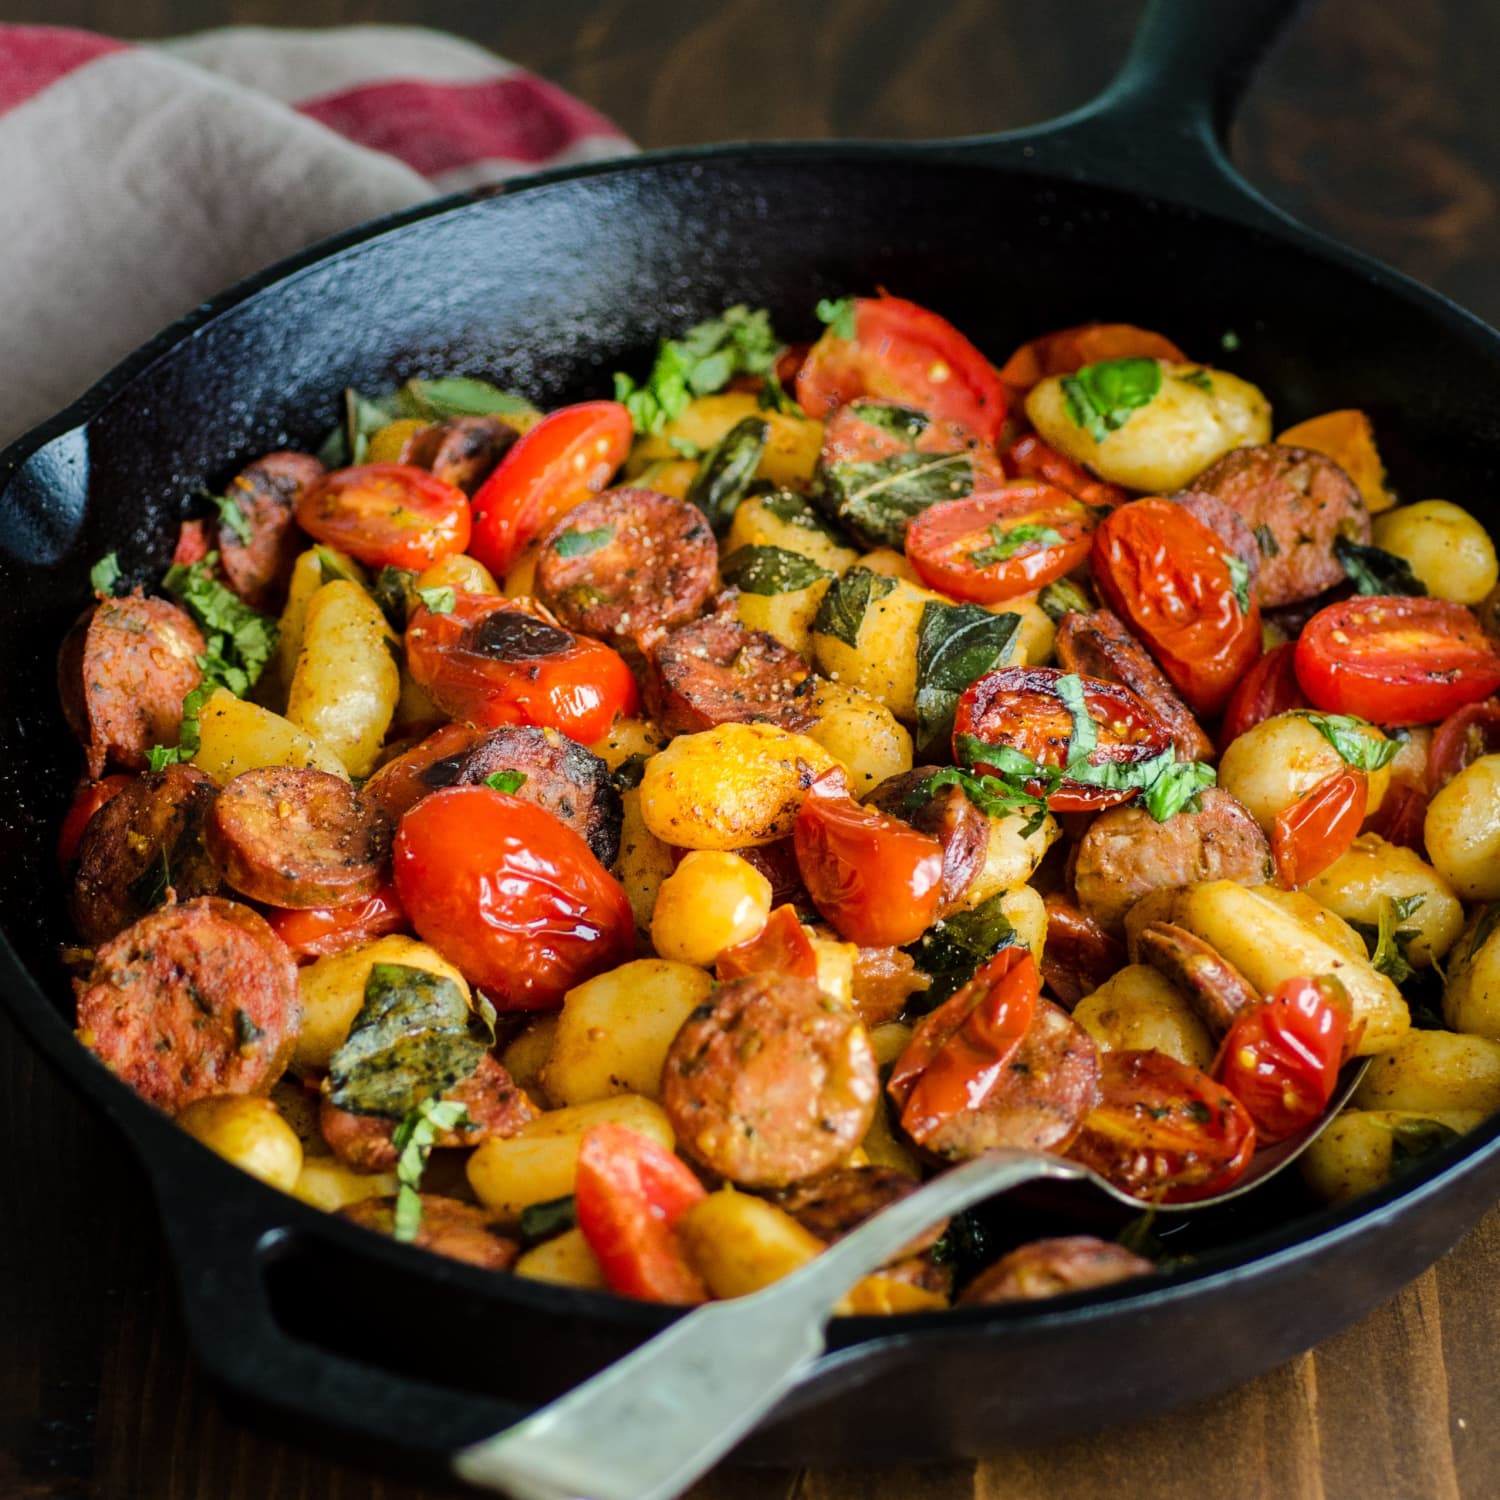 Why the Cast Iron Skillet Is the Key to Better One-Pan Cooking